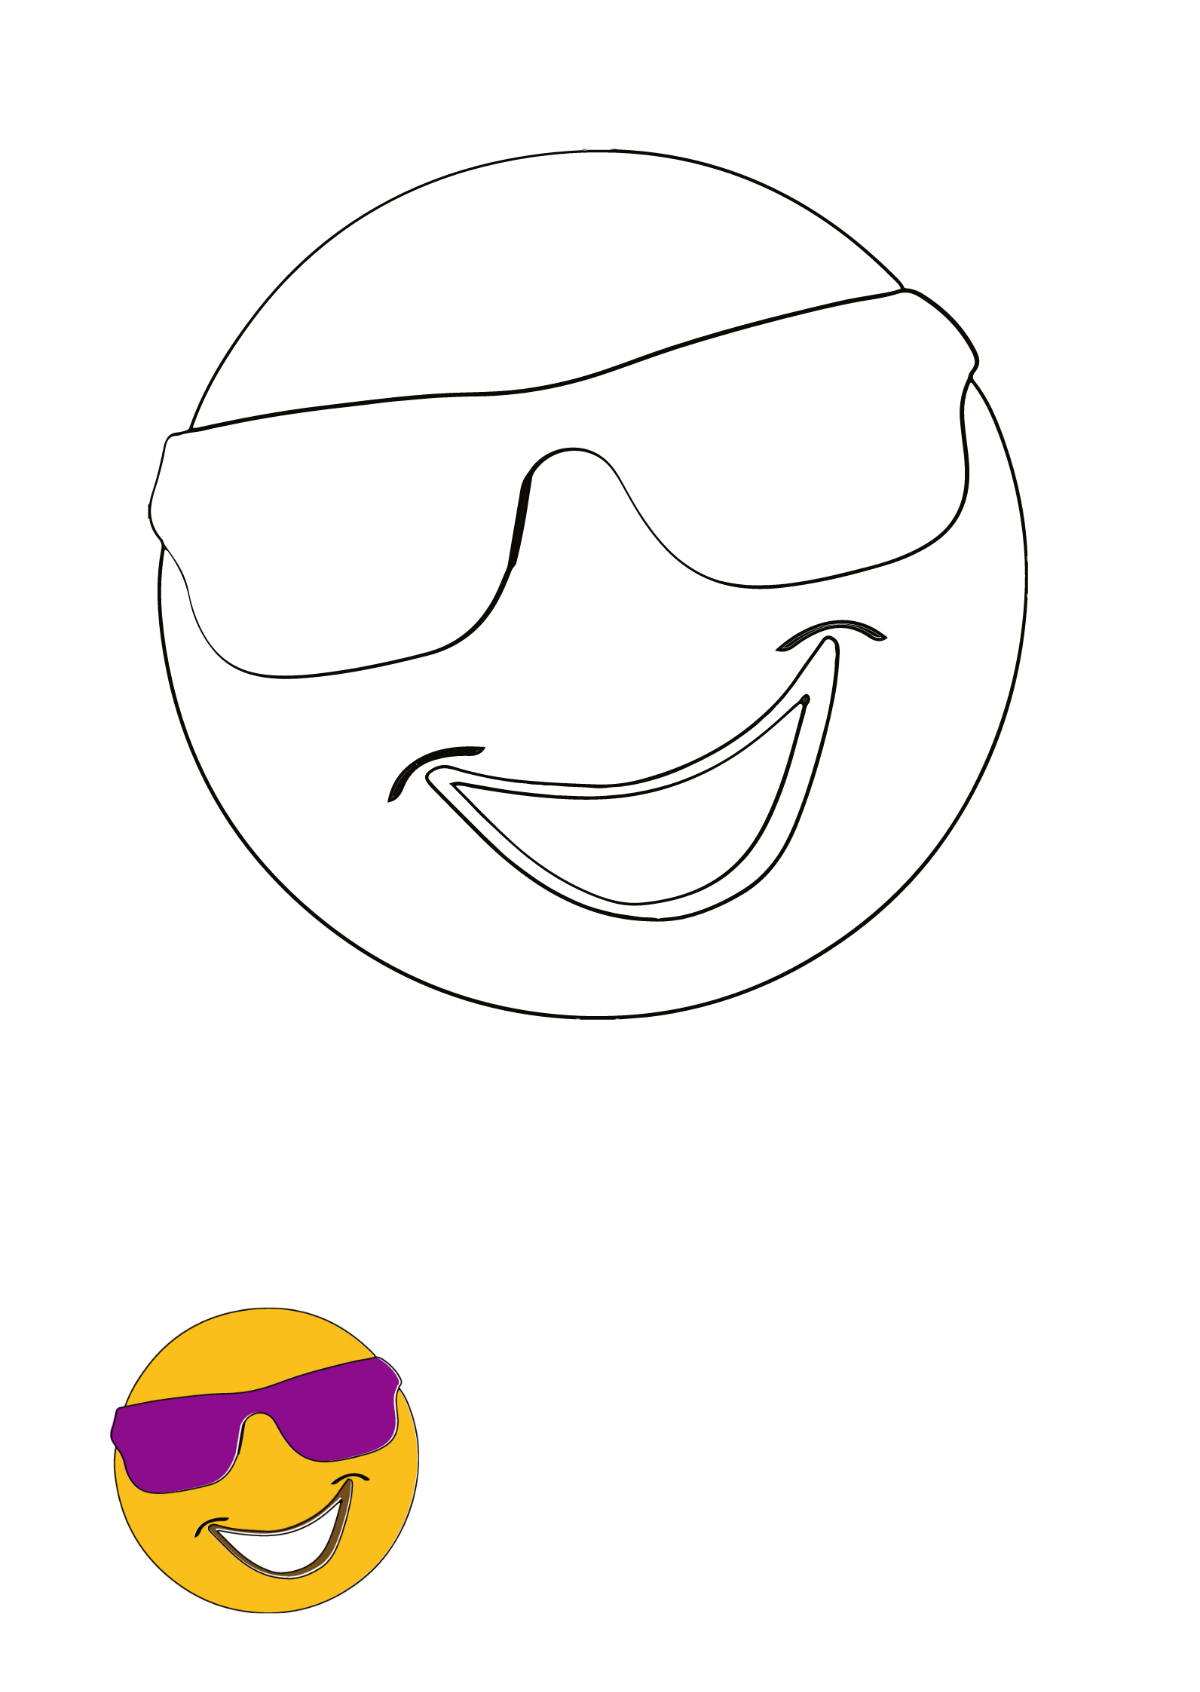 Smiley Face Sunglasses Coloring Page